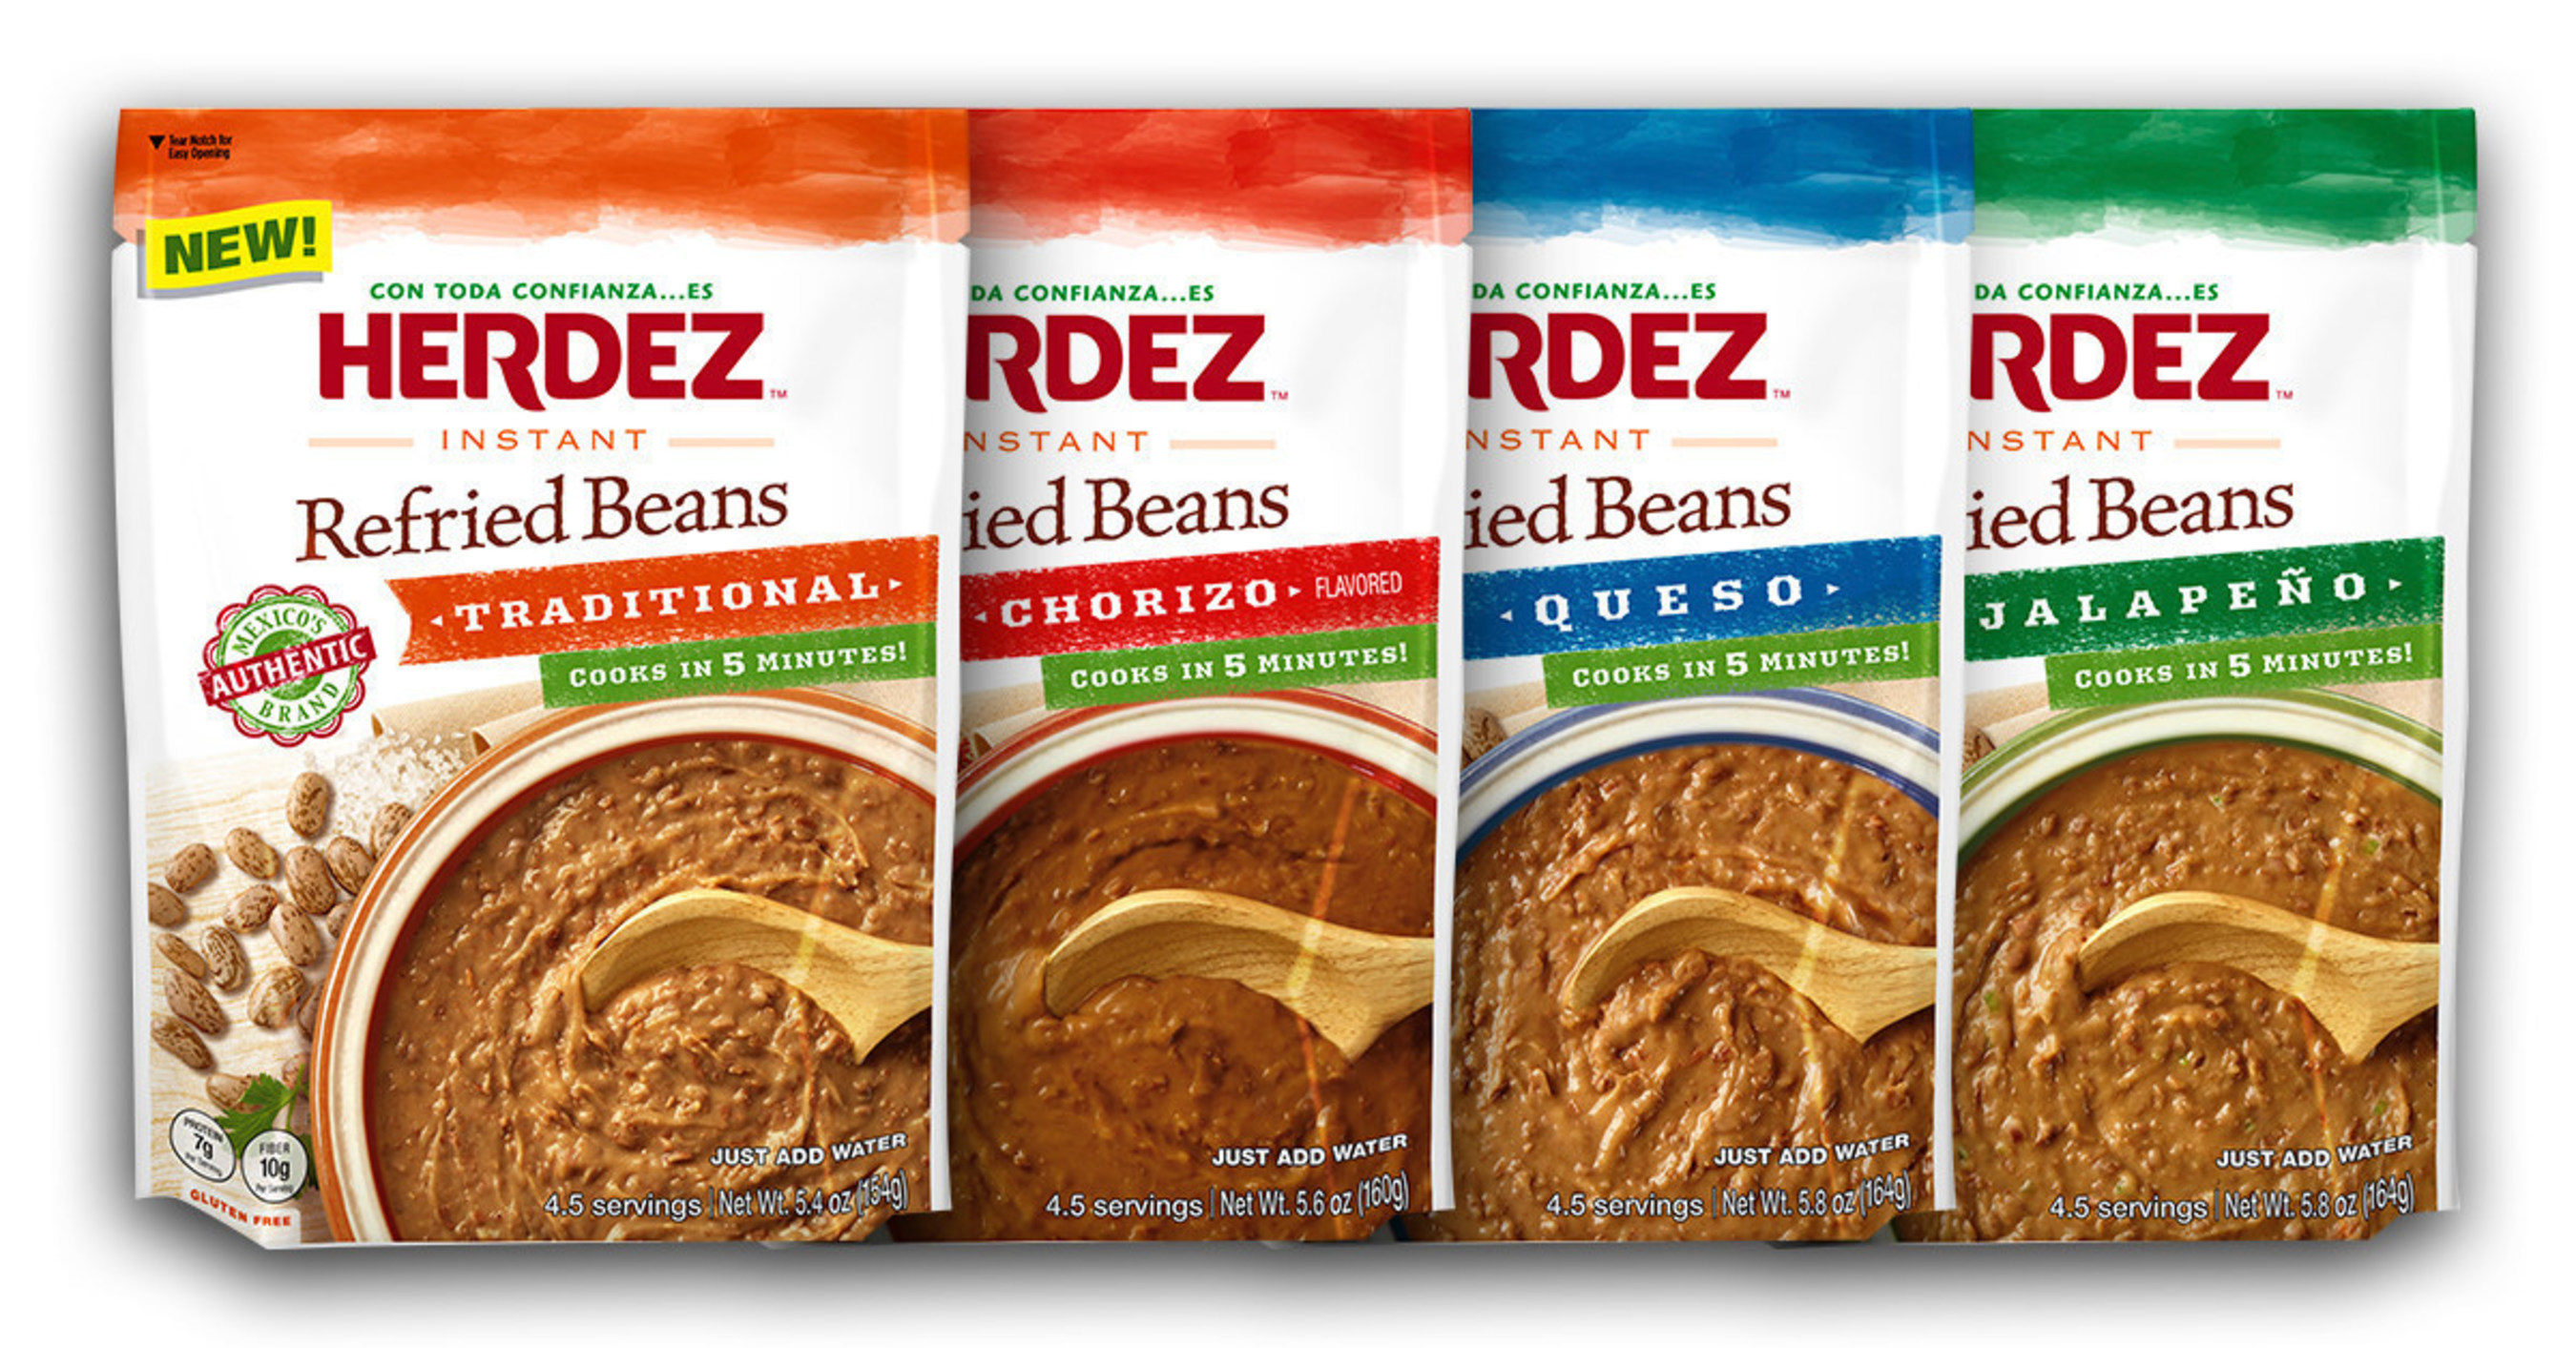 IDAHOAN(R) Foods And The Makers Of The HERDEZ(R) Brand Announce Licensing Agreement